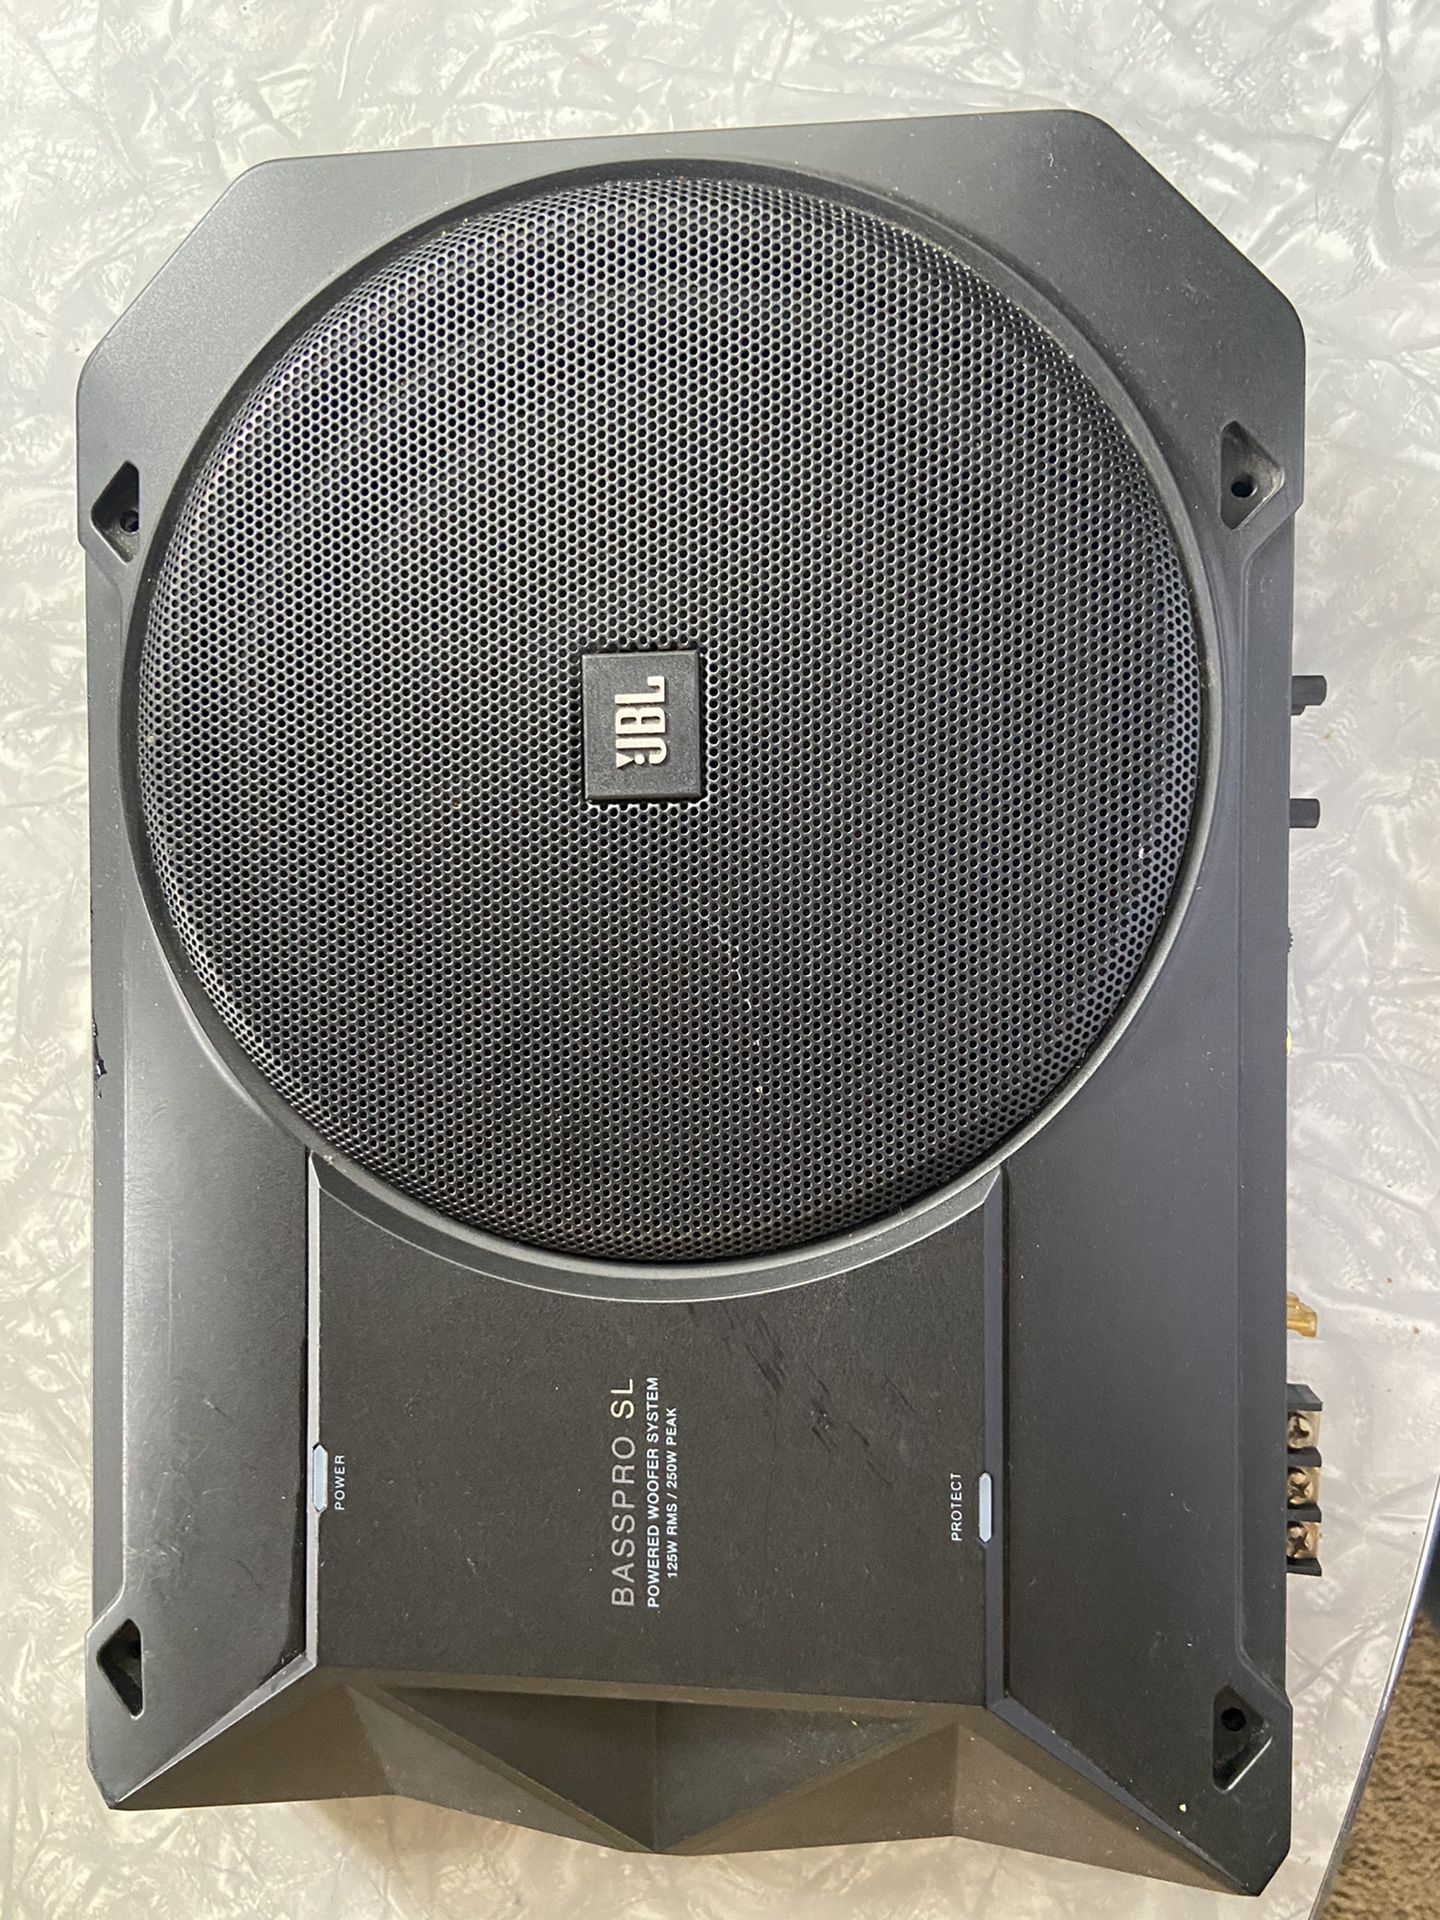 JBL BASSPRO SL 8” Powered Subwoofer w/ Harmon Remote Control and Cable